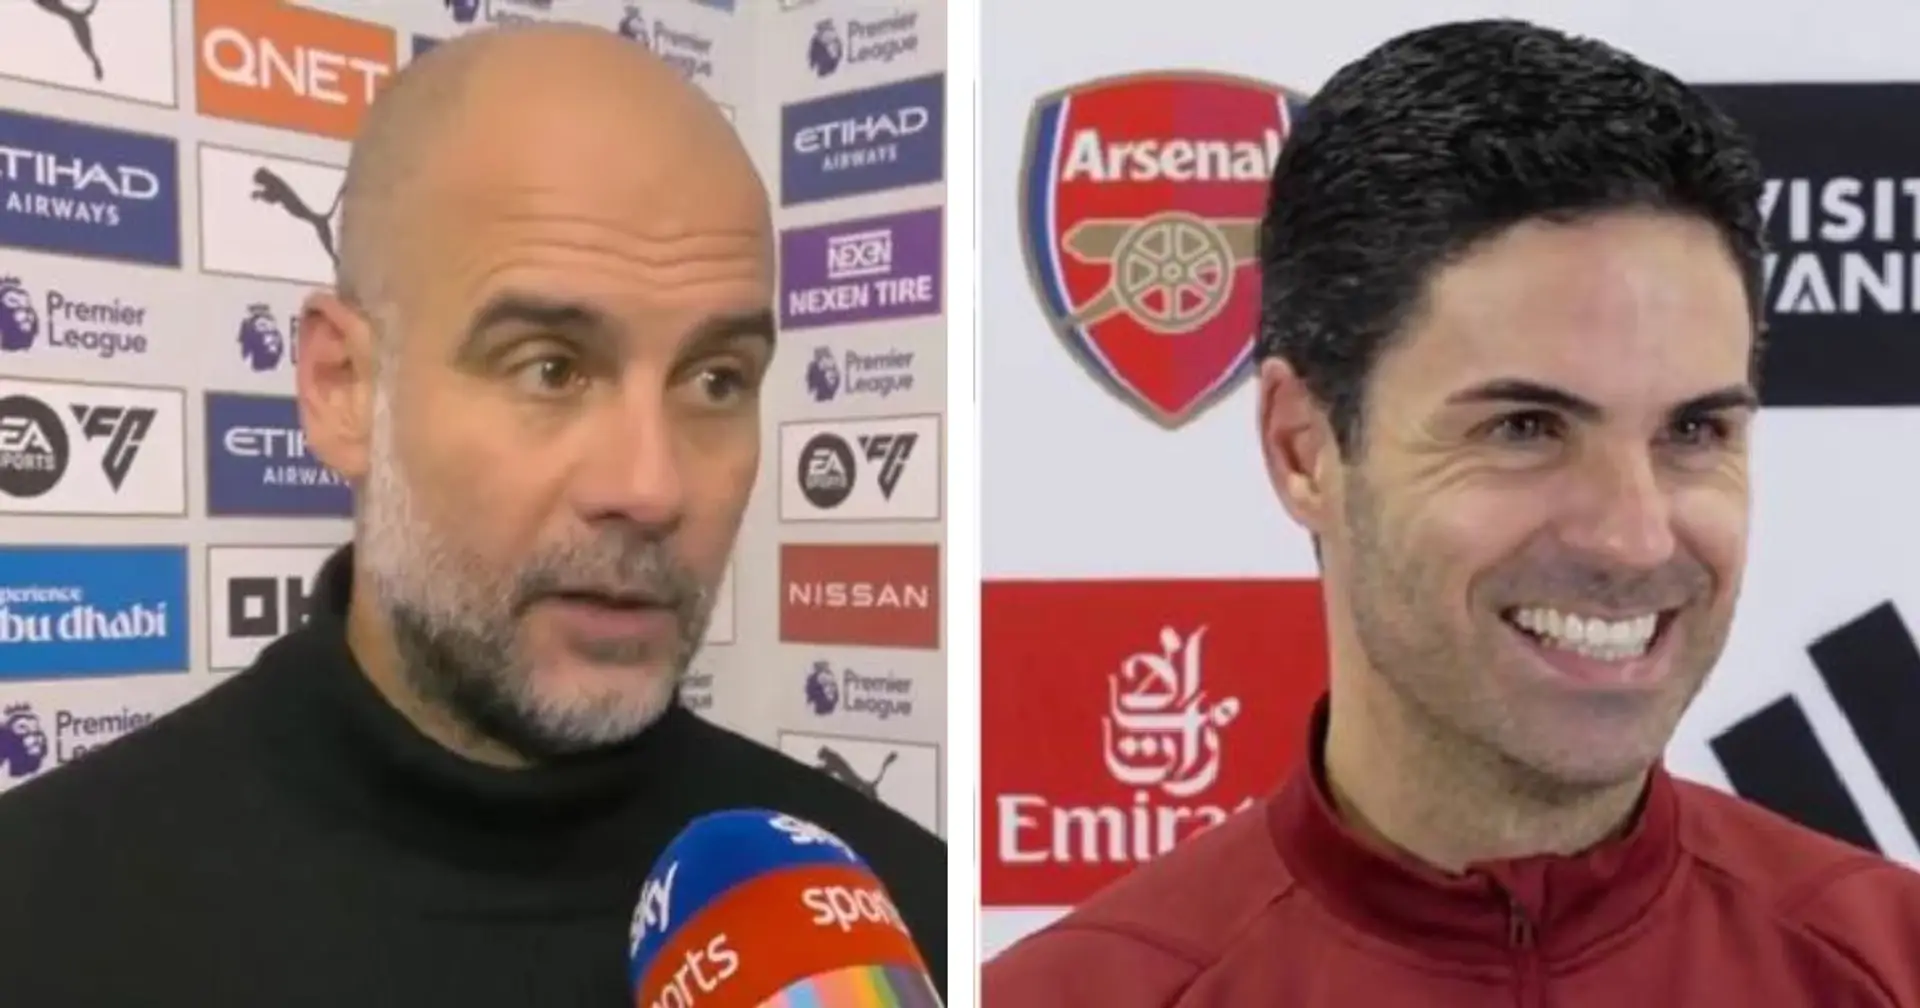 Arteta gives brilliant response to Guardiola's dig & 2 more big stories you might've missed 